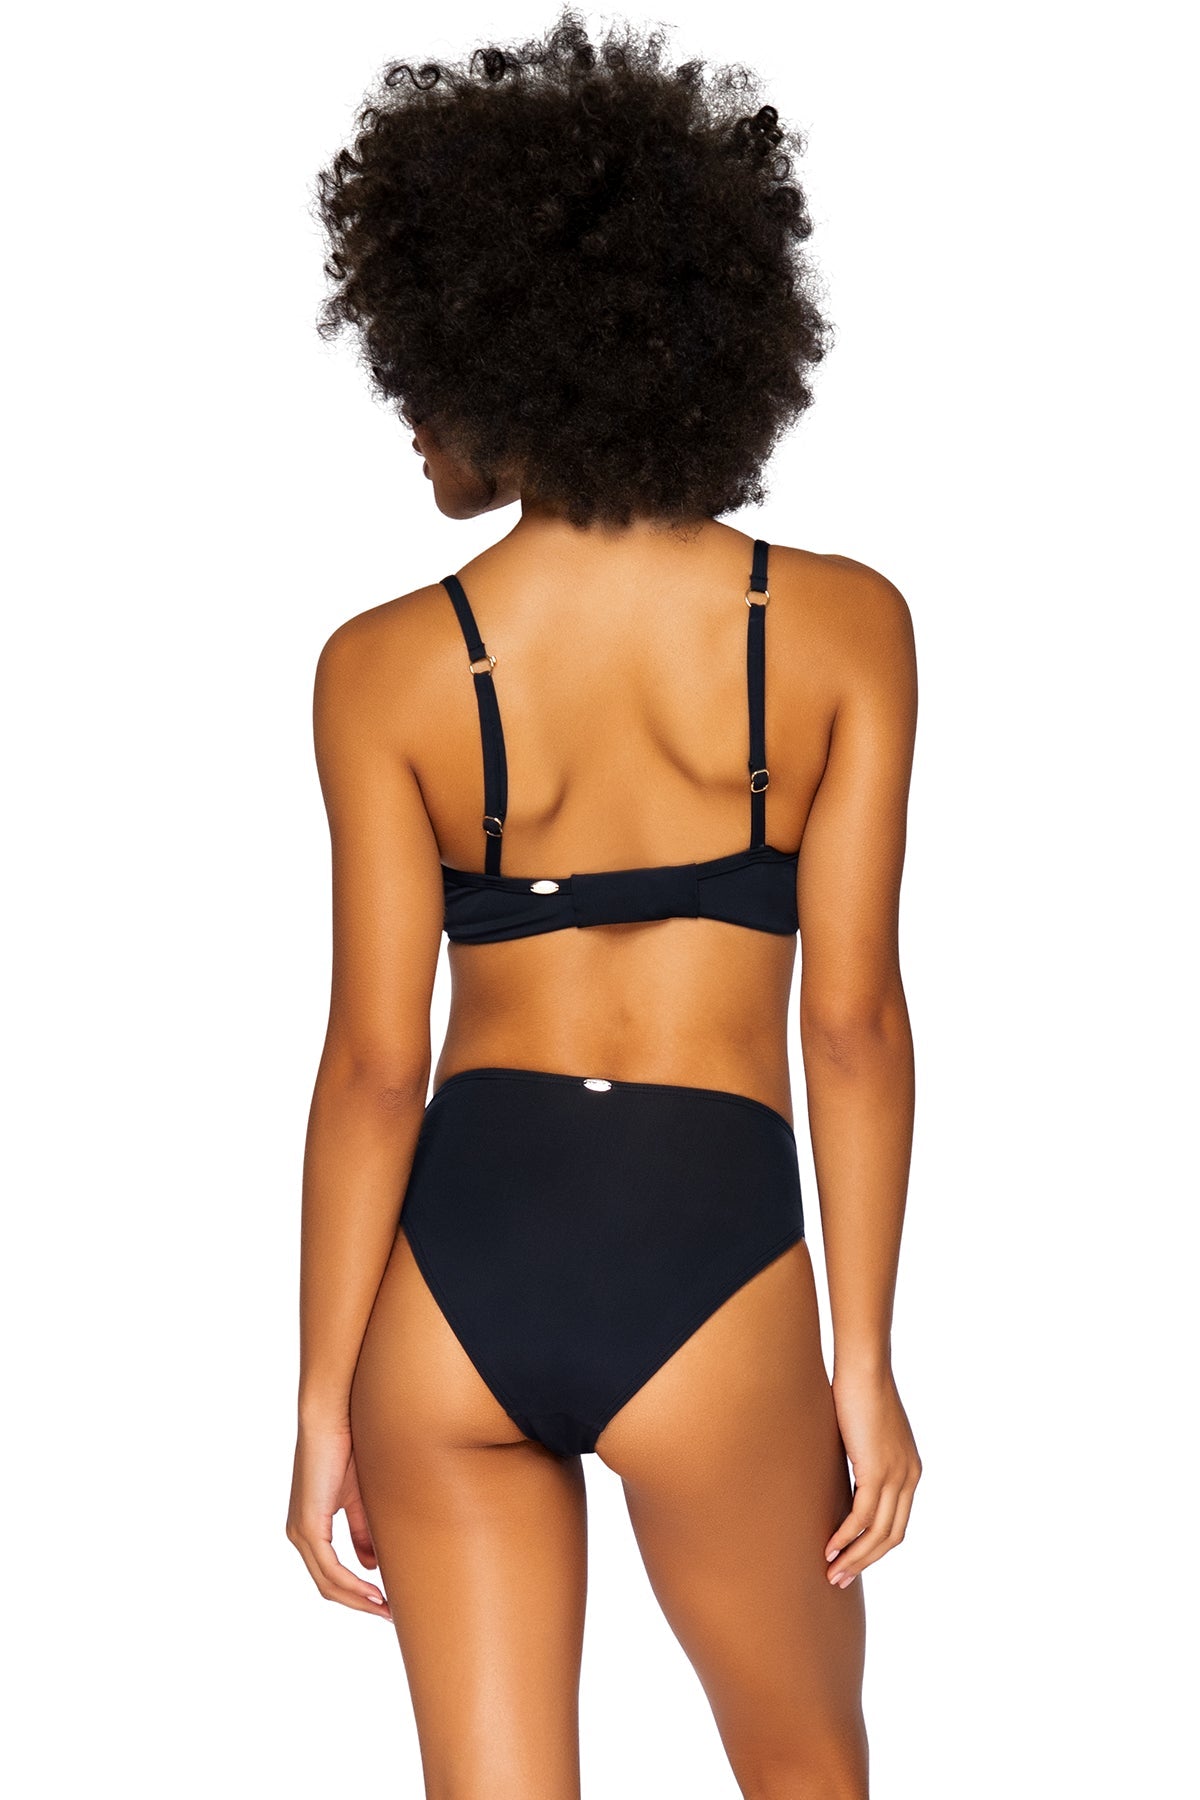 Sunsets Crossroads D/DD Cup Underwire Top - Black